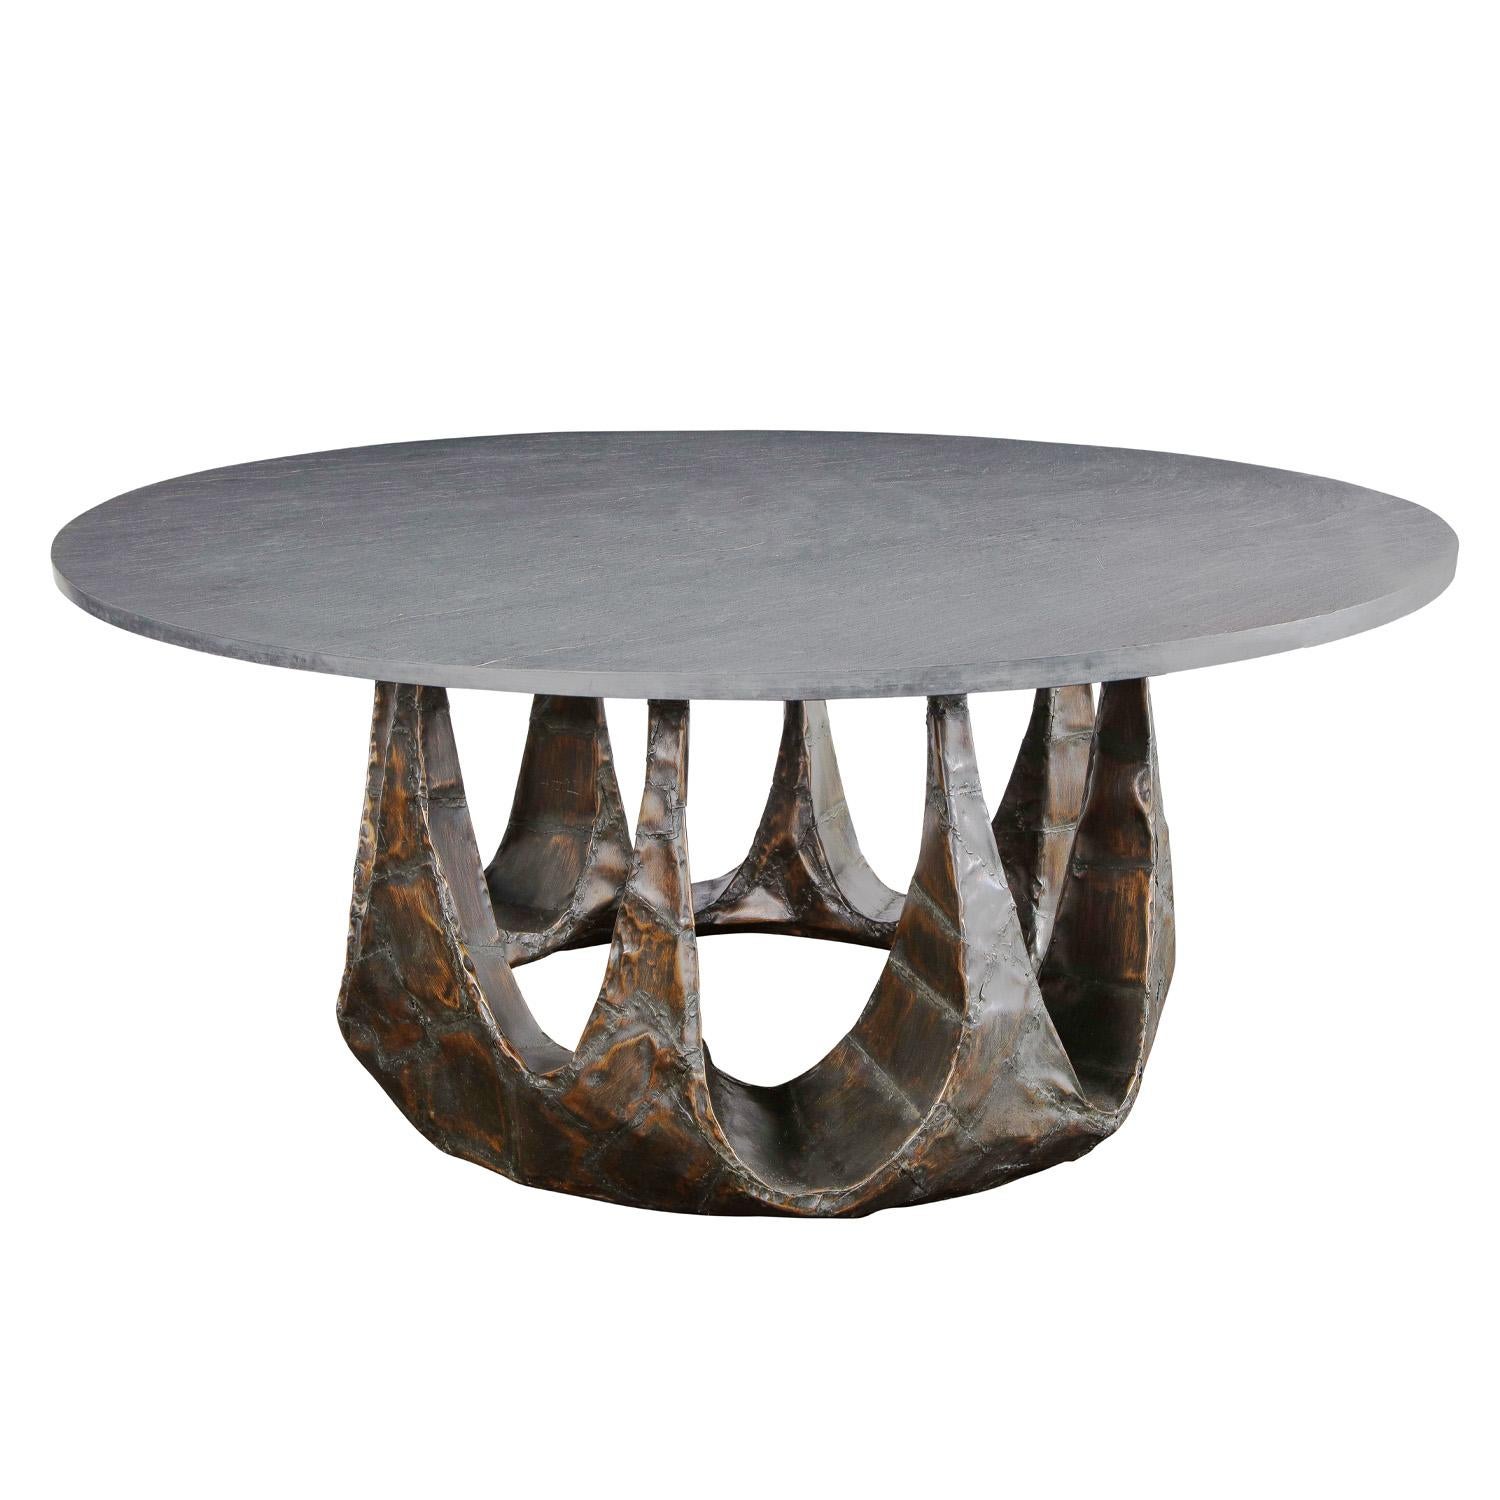 Incredibly rare and important patinated welded steel base dining table with gray slate slab top by Paul Evans Studio, American 1960's. This is the only dining table of this design which we have seen. The scale and artisanship are truly superb. It is